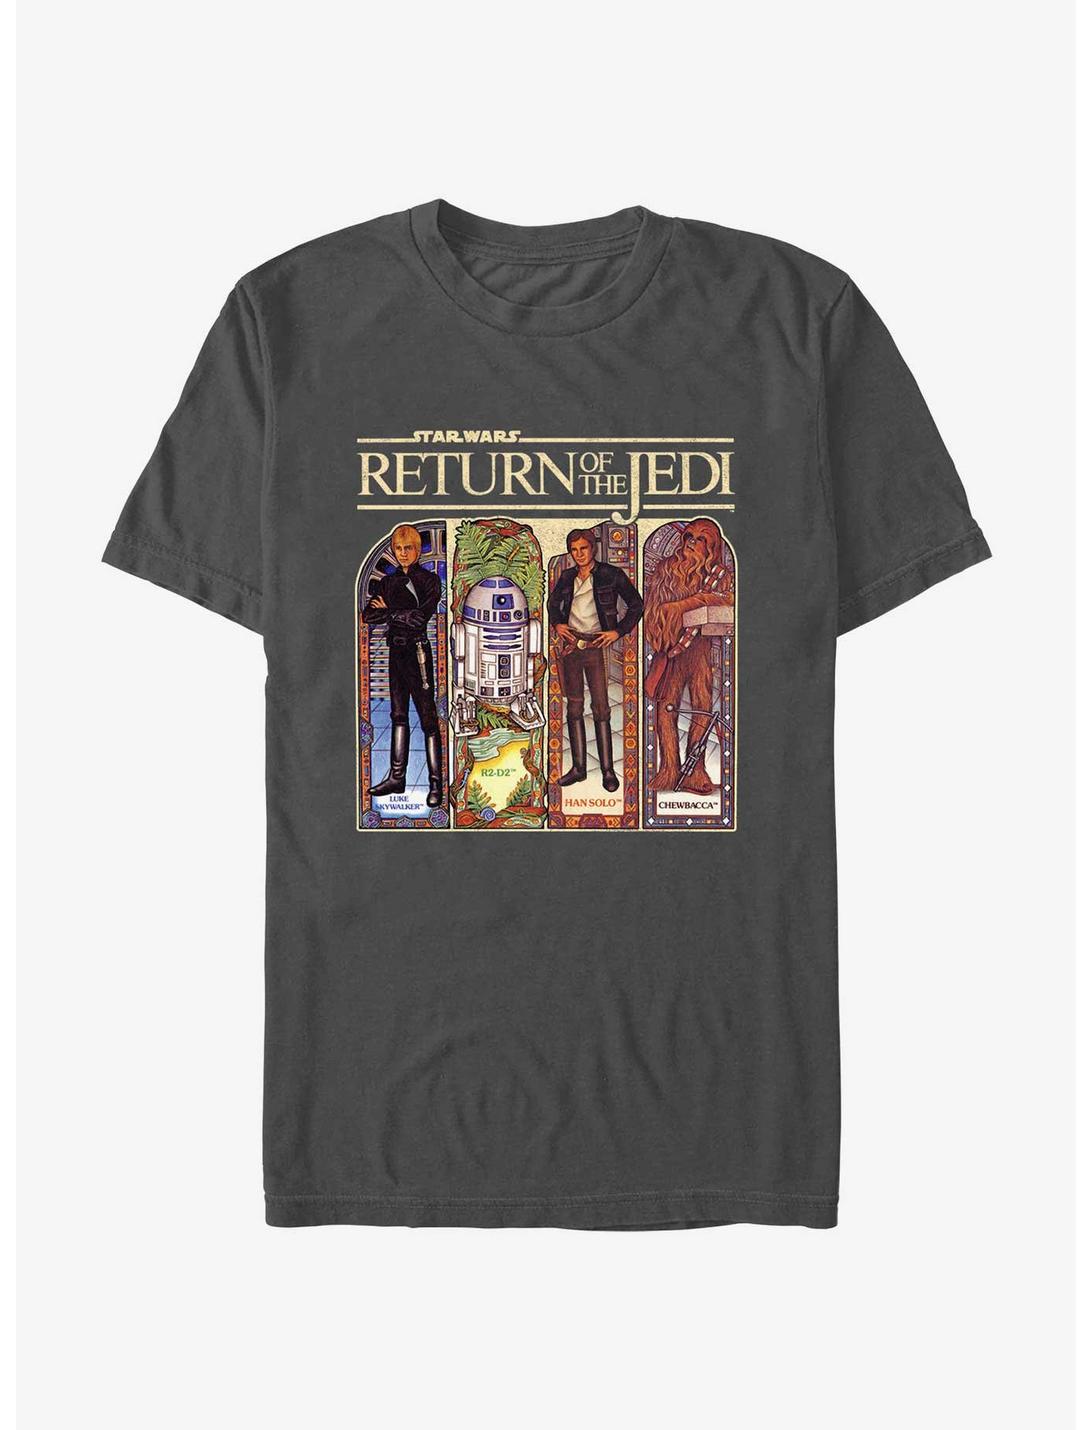 Star Wars Return Of The Jedi Stained Glass Characters T-Shirt, CHARCOAL, hi-res